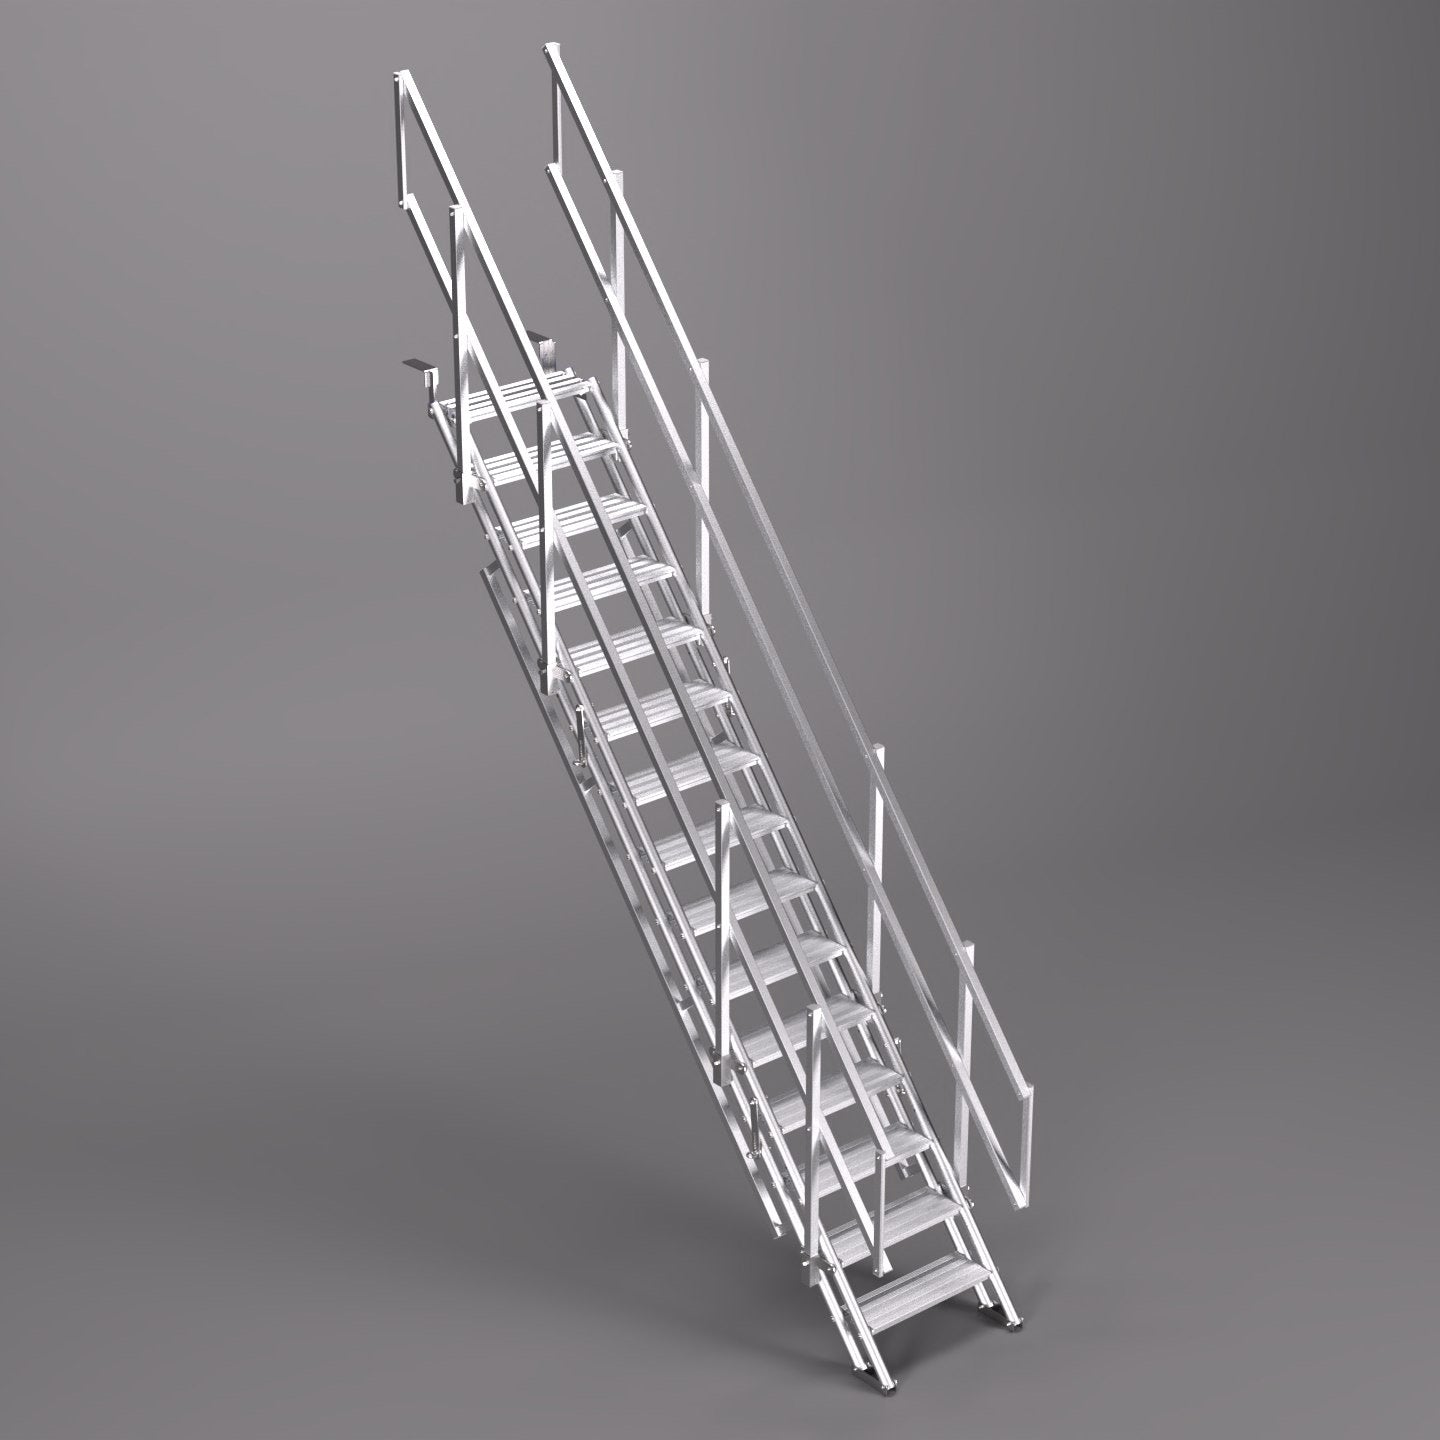 An image of a 3.0m ALTO Universal Stair Set with the flat slab fixing option.